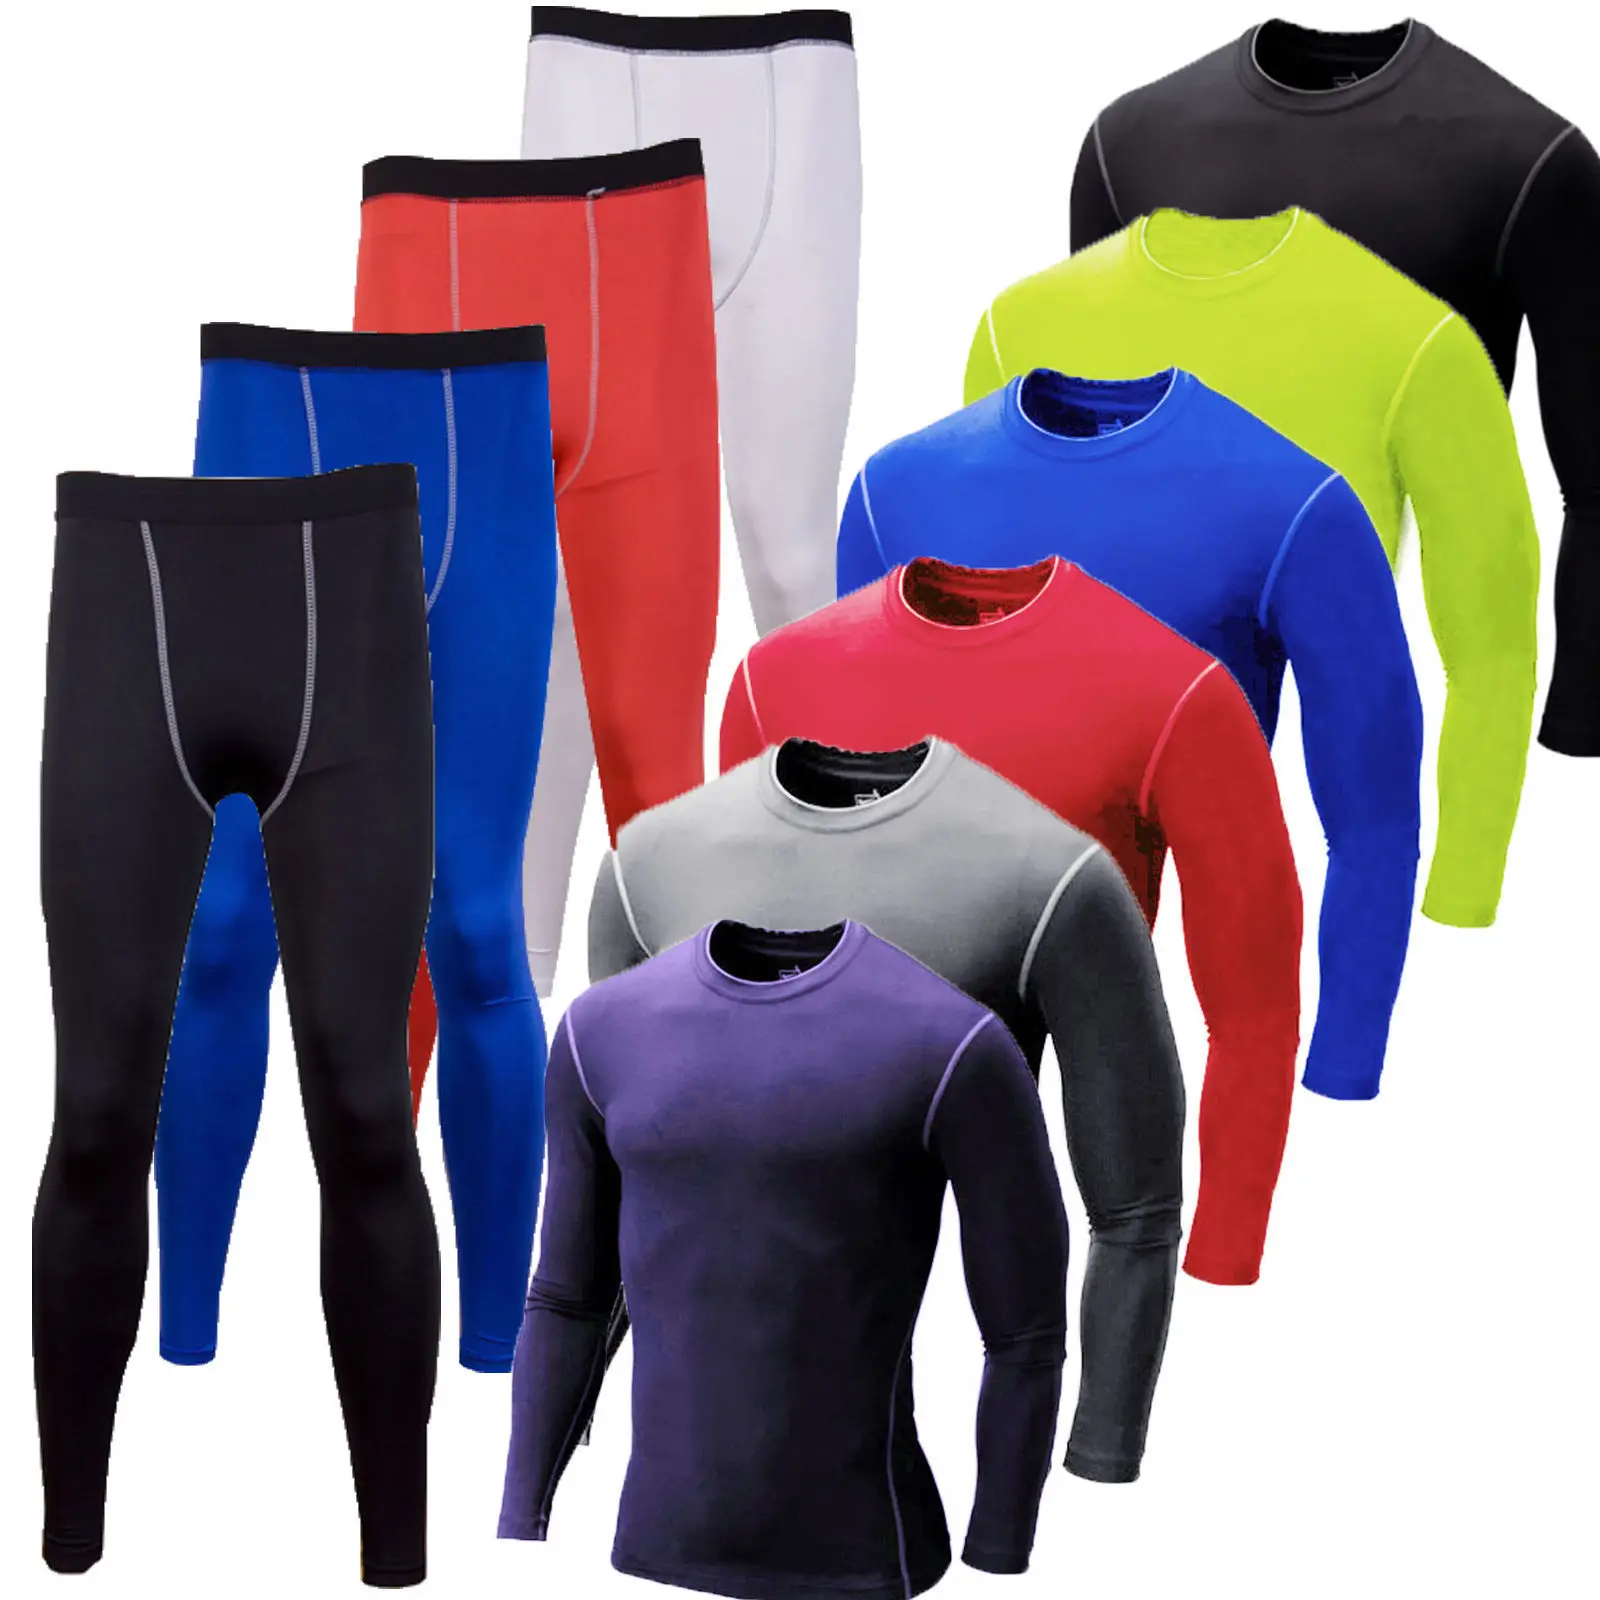 Mens Compression Wear Sports Skin Tights Base Under Layer T Shirts Pants 